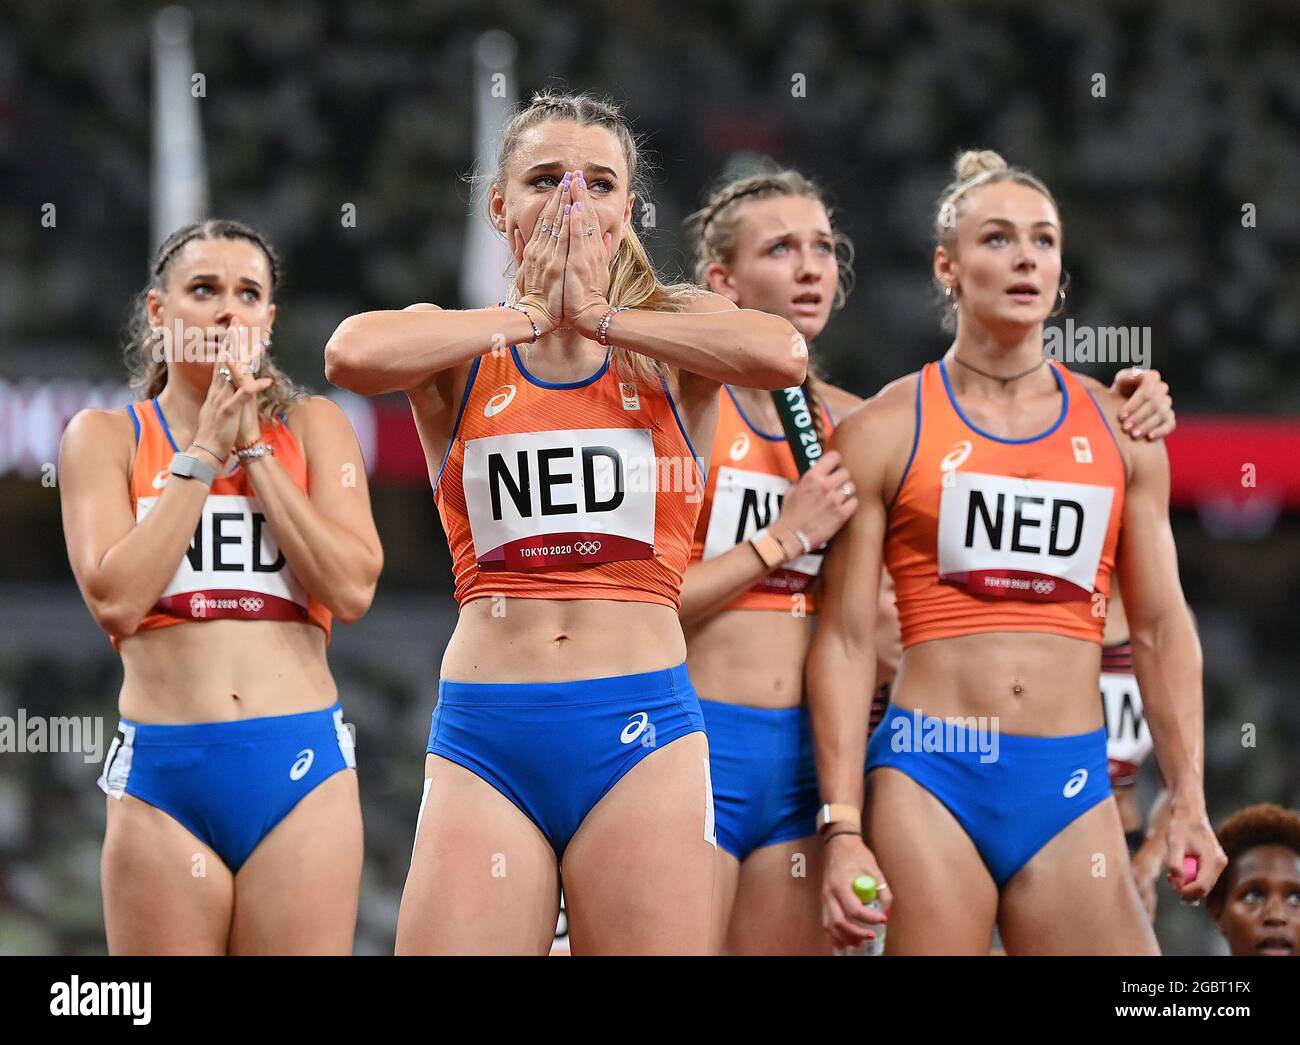 Tokyo, Japan. 5th Aug, 2021. Team members of the Netherlands react